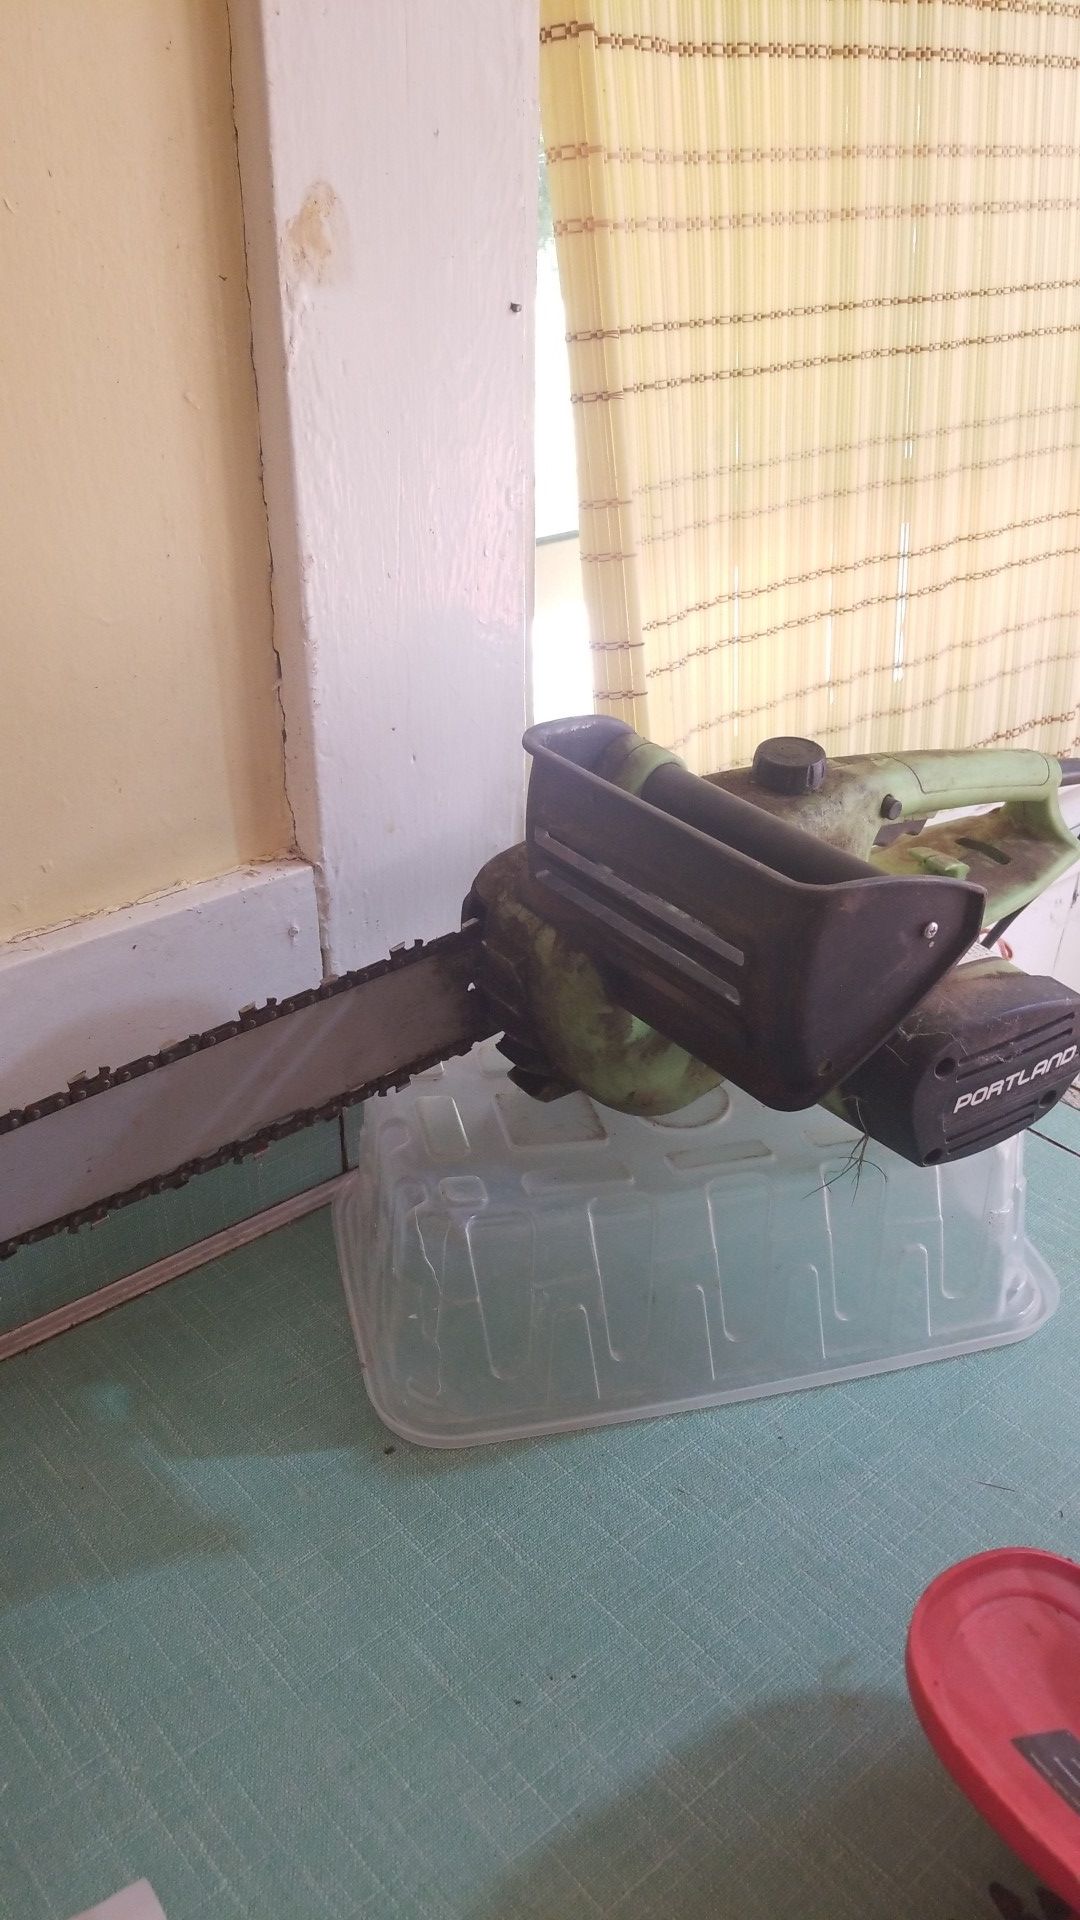 Electric chainsaw